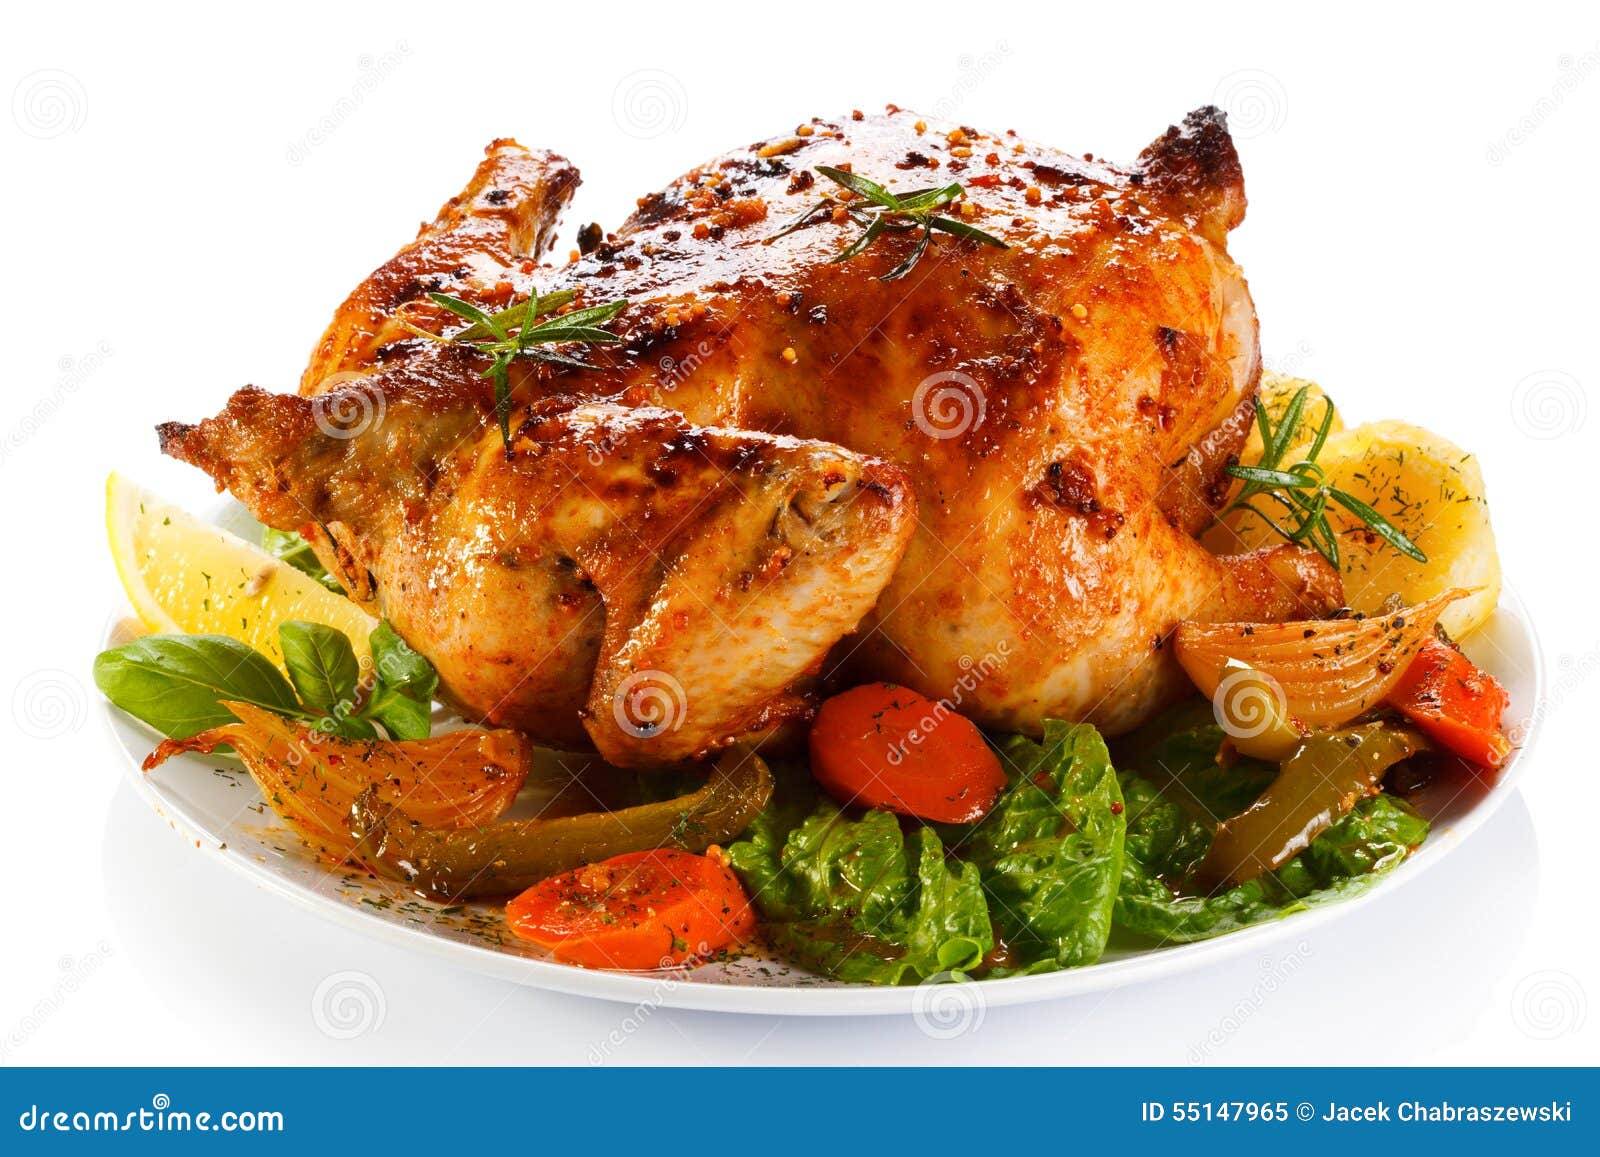 Can you steam cooked chicken фото 106